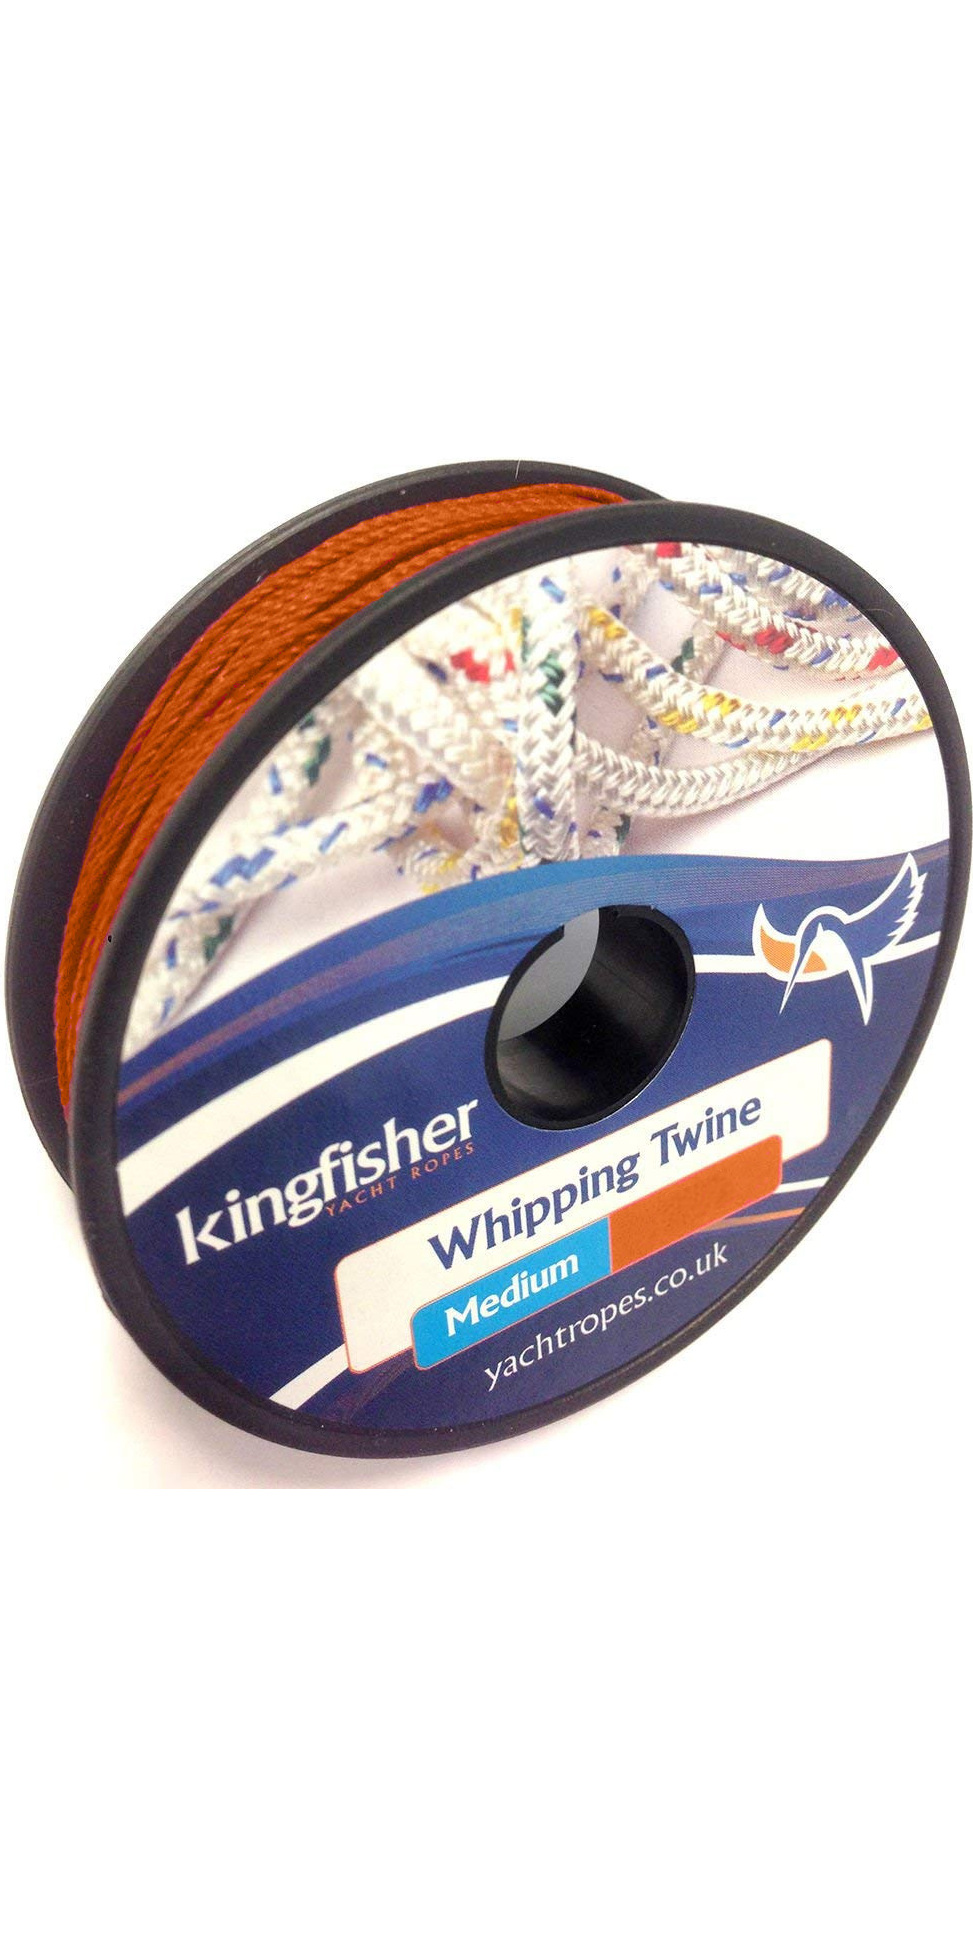 https://cdn.watersportsoutlet.com/images/Kingfisher-Twisted-Whipping-Twine-Orange-WTYB.jpg